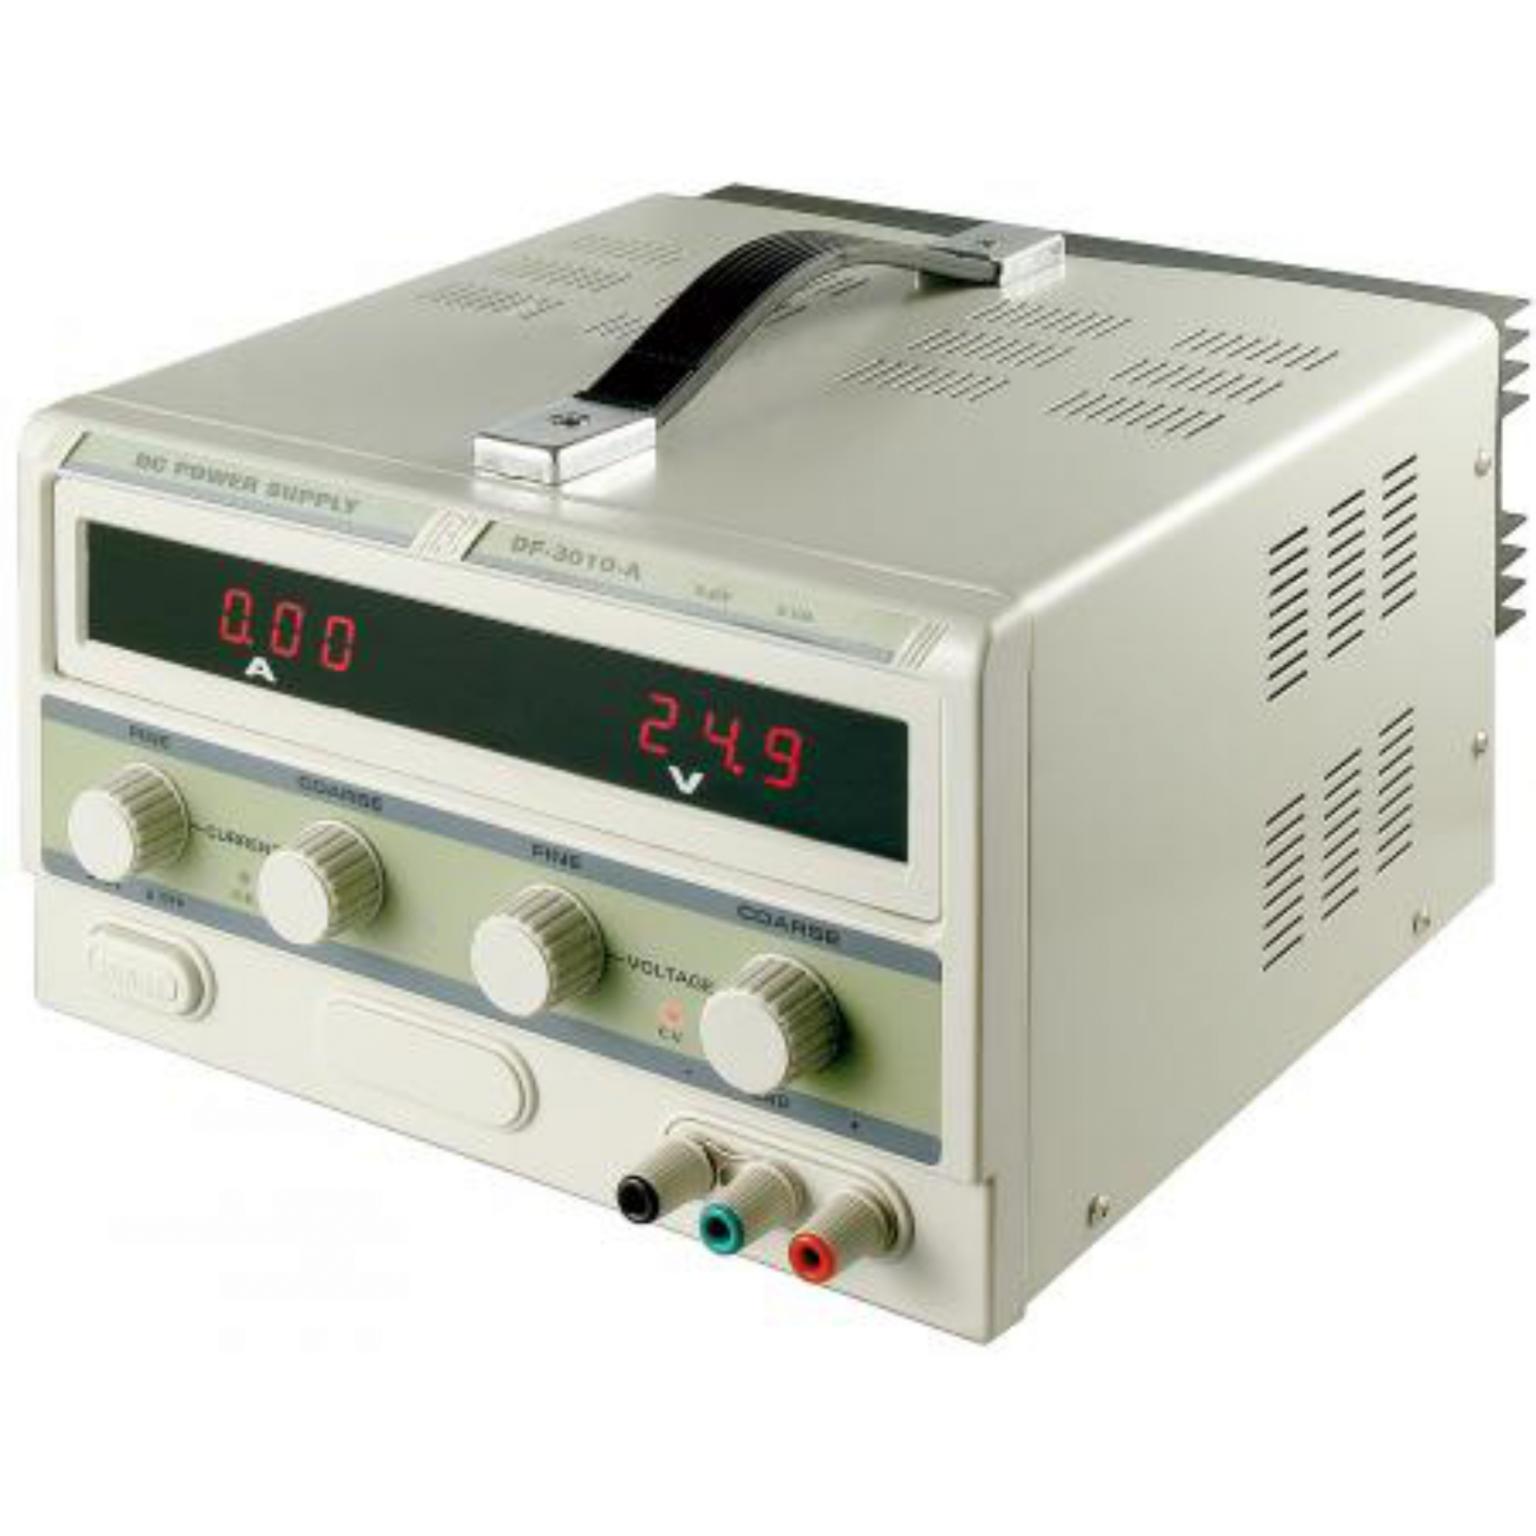 Image of Laboratory power supply unit adjustable from 0-10 ampere and 0-30 V DC